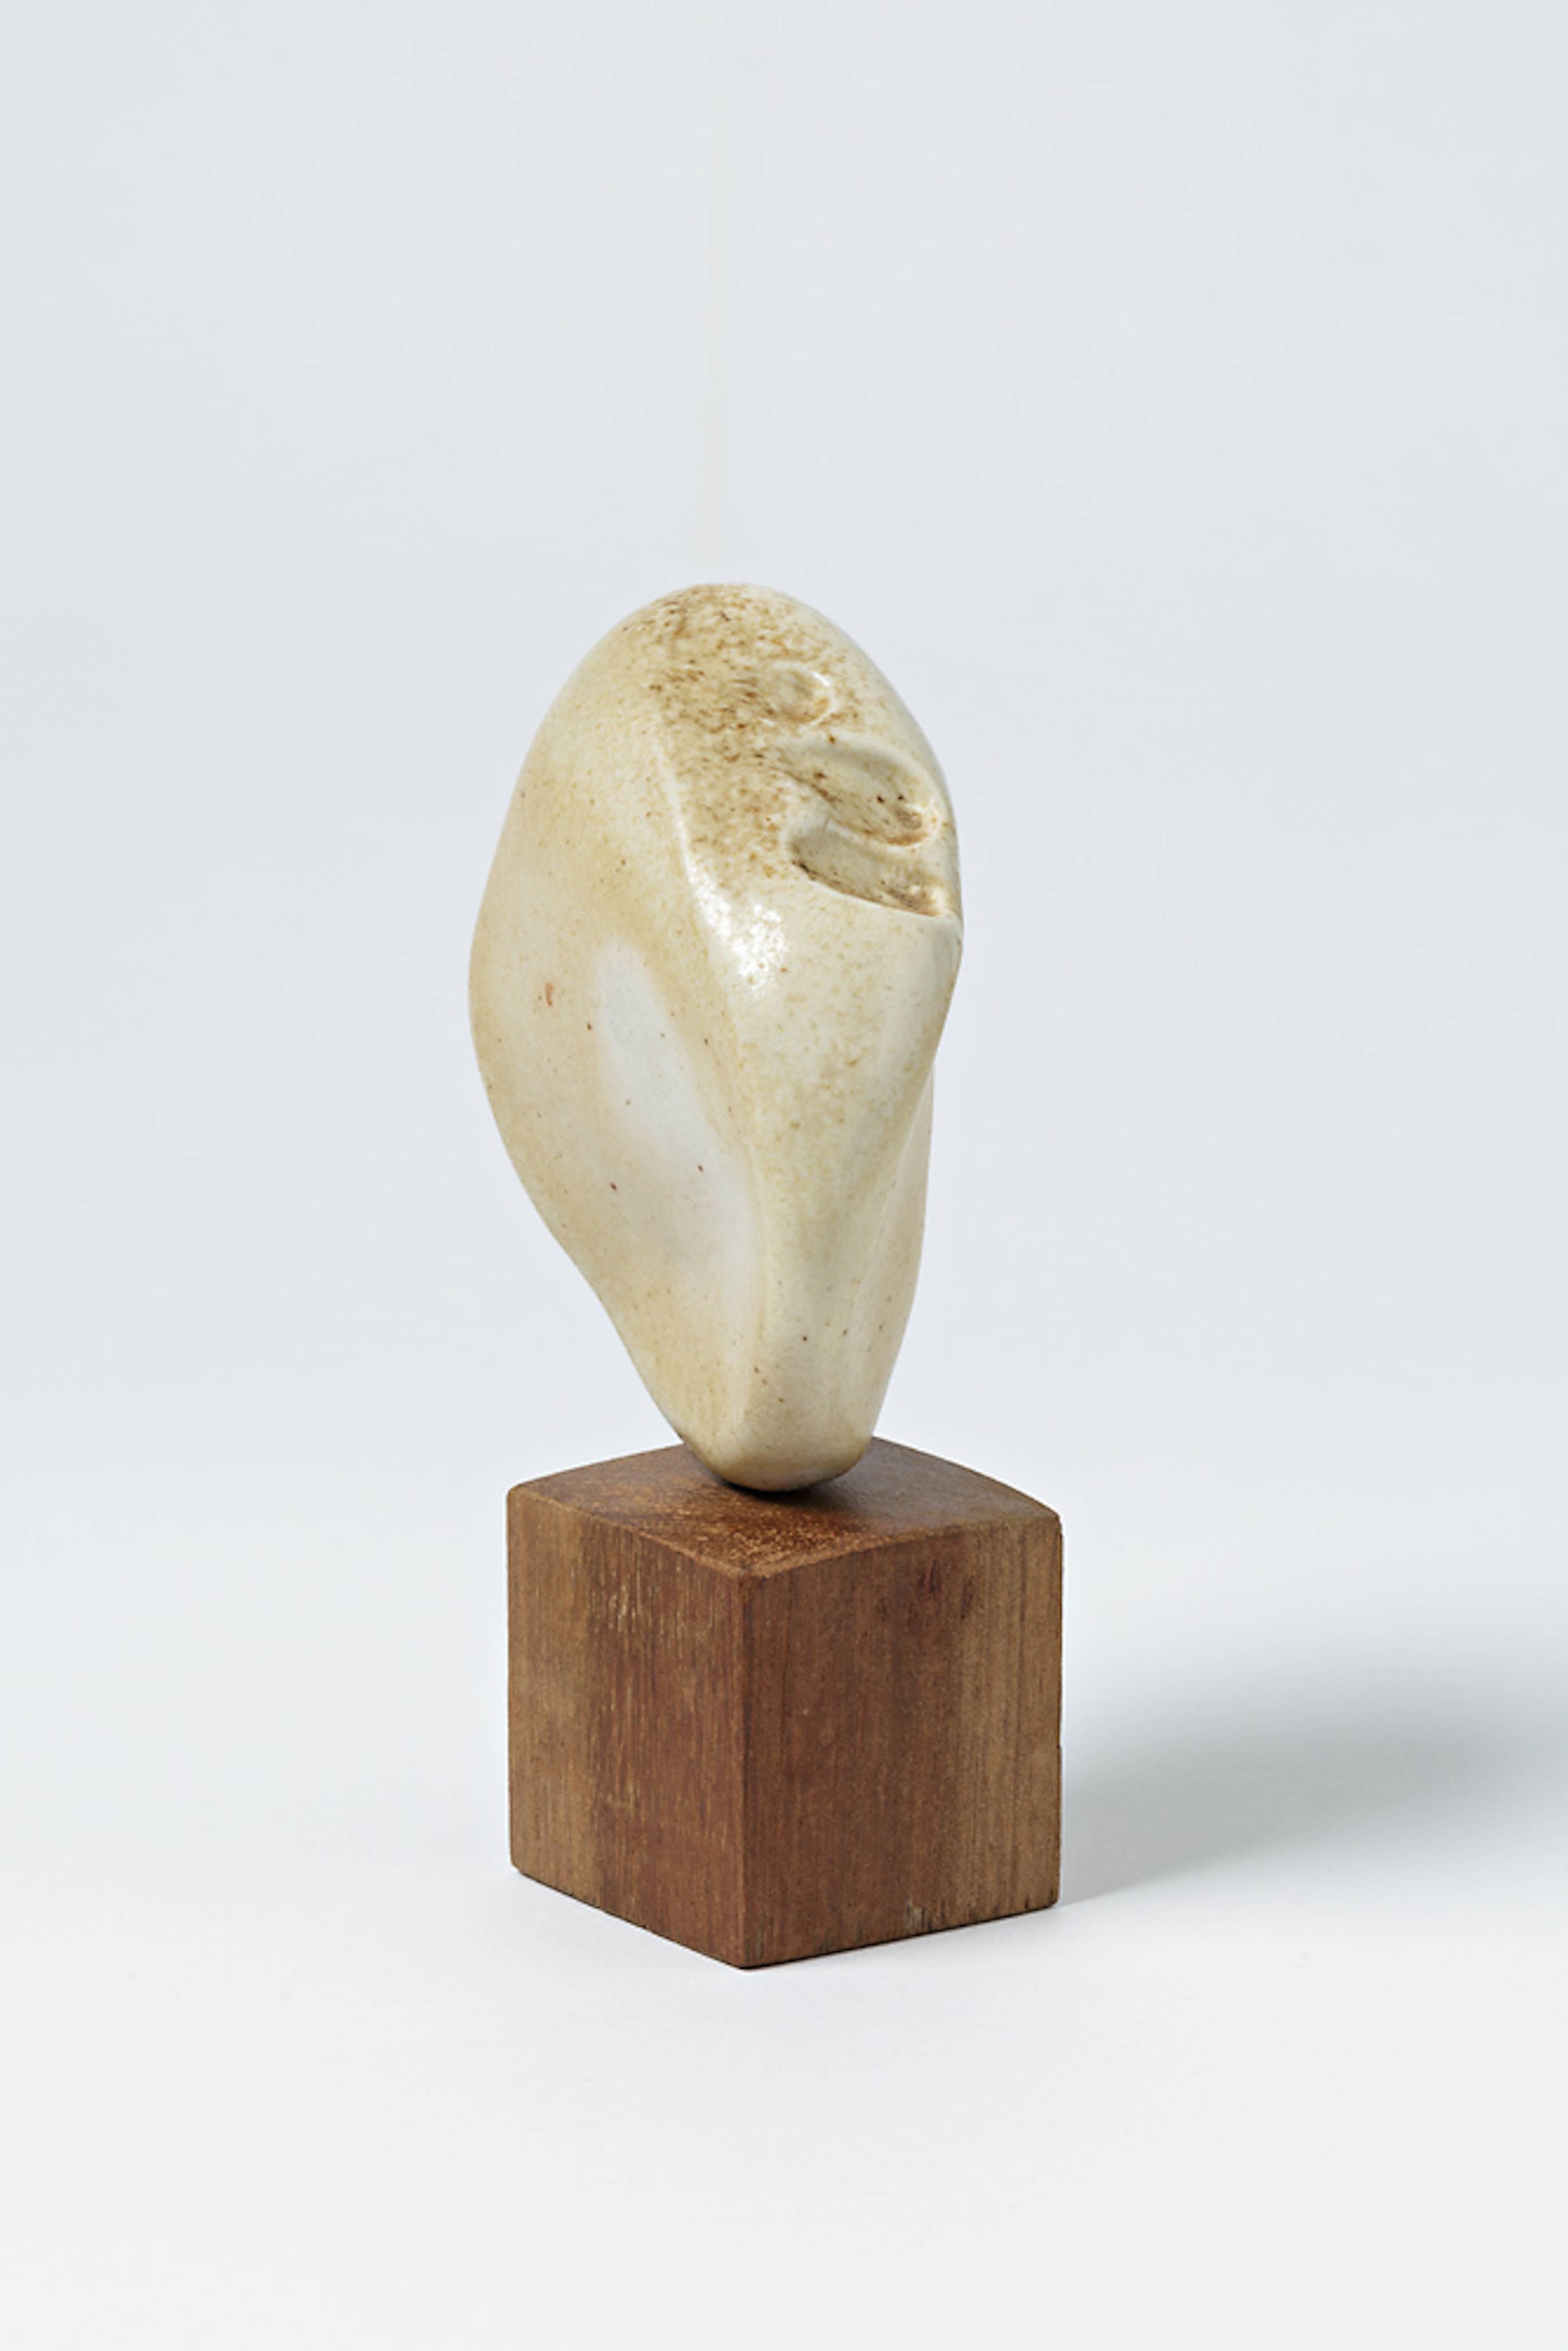 French Small Ceramic Sculpture by Elisabeth Joulia, circa 1990